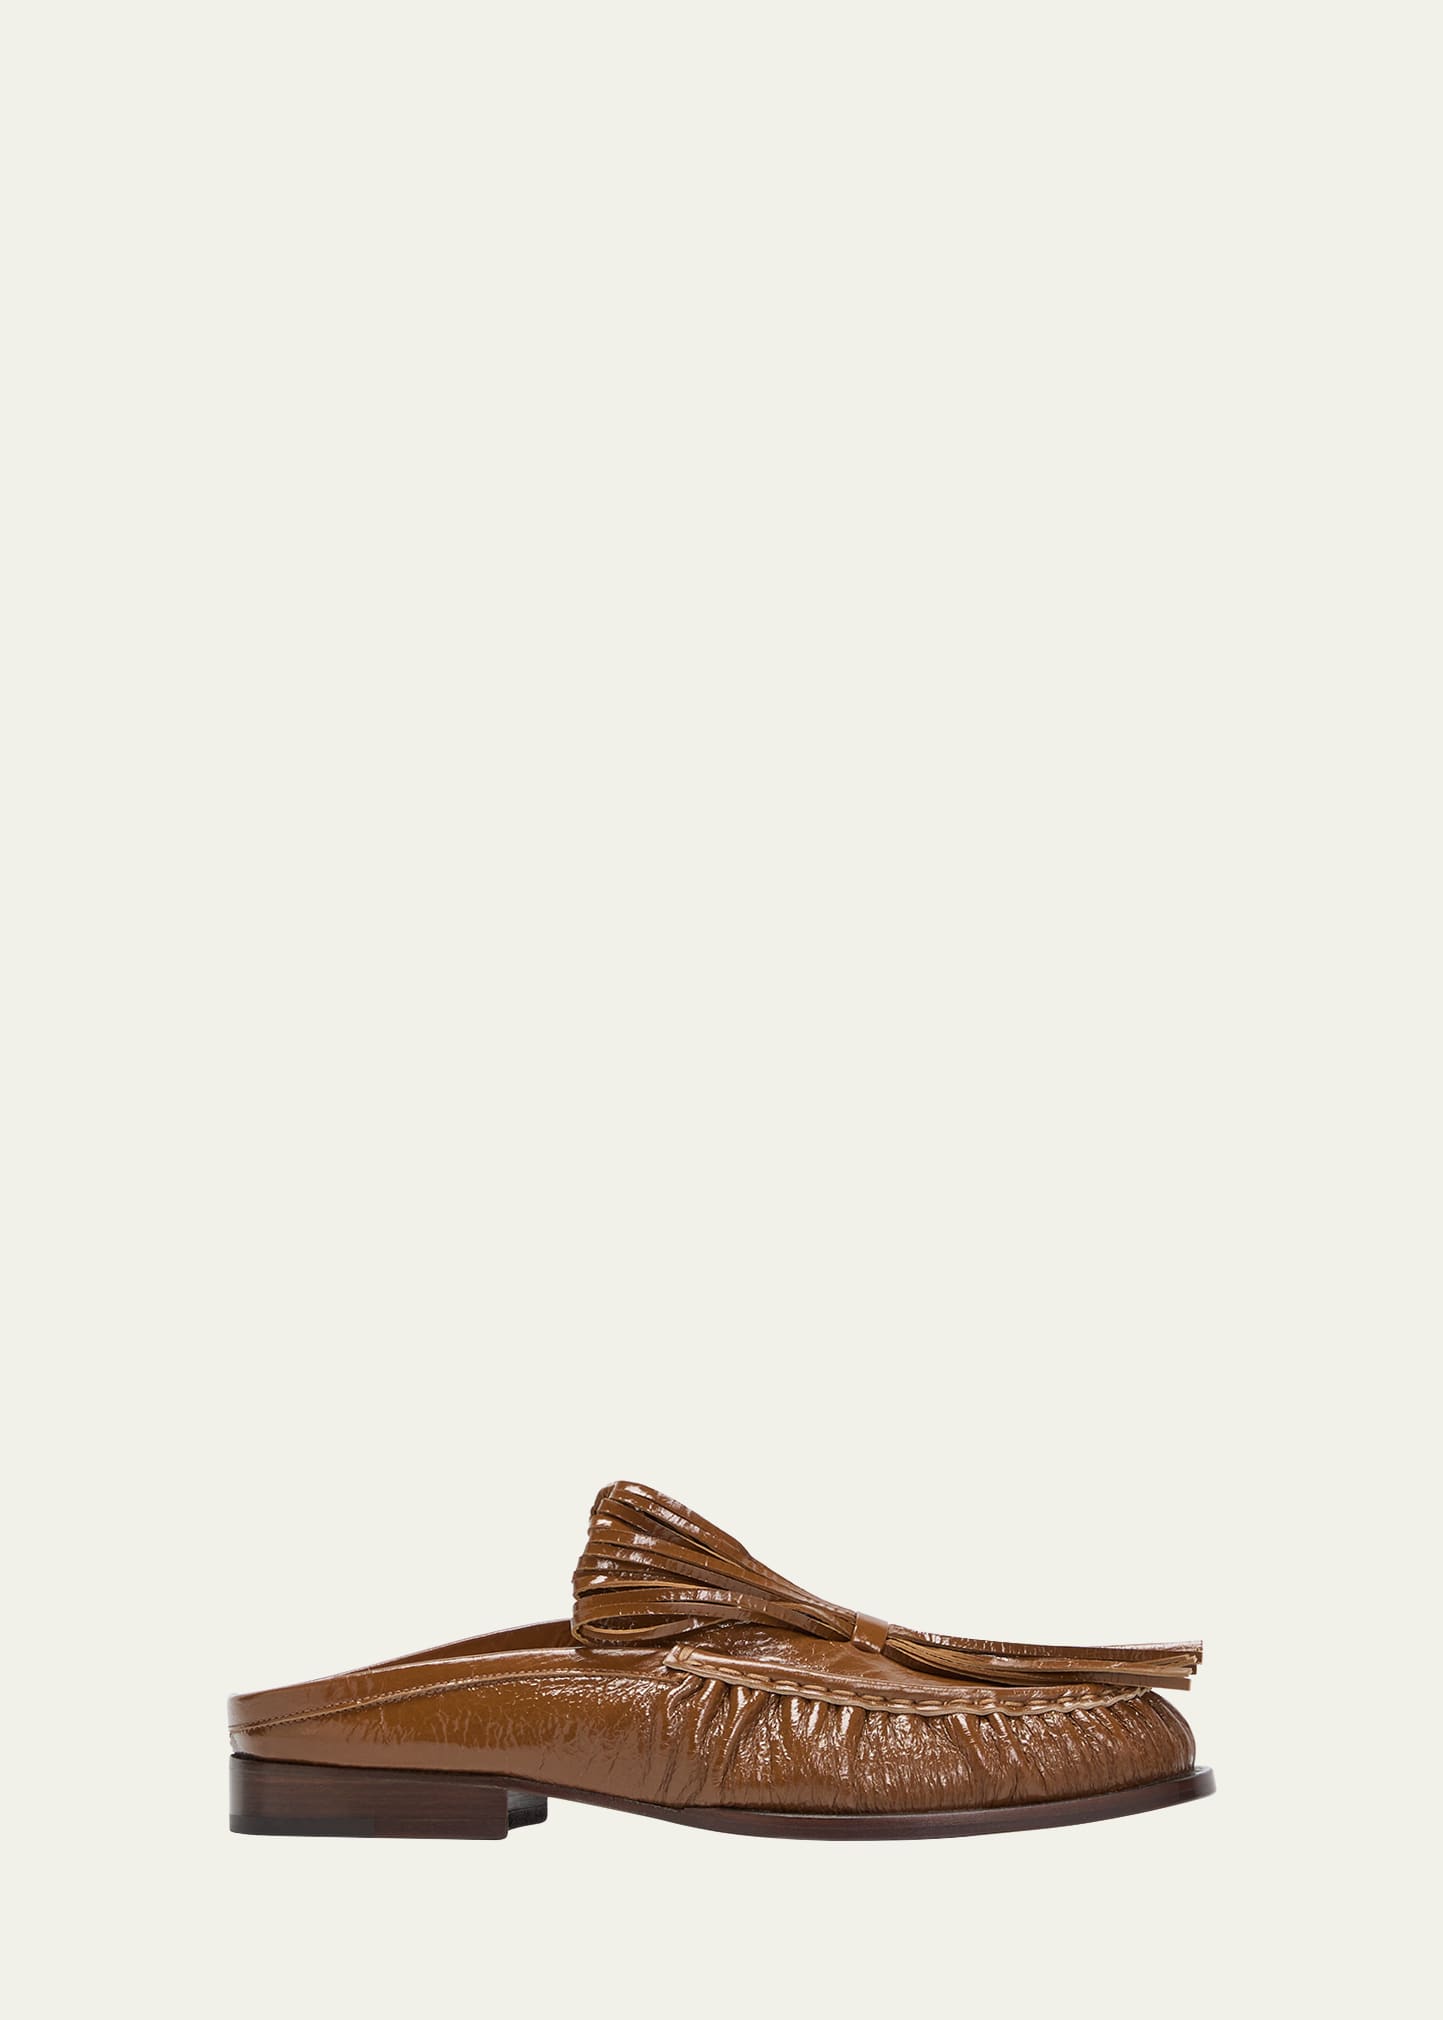 Dries Van Noten Shiny Leather Fringe Loafer Mules In Tan